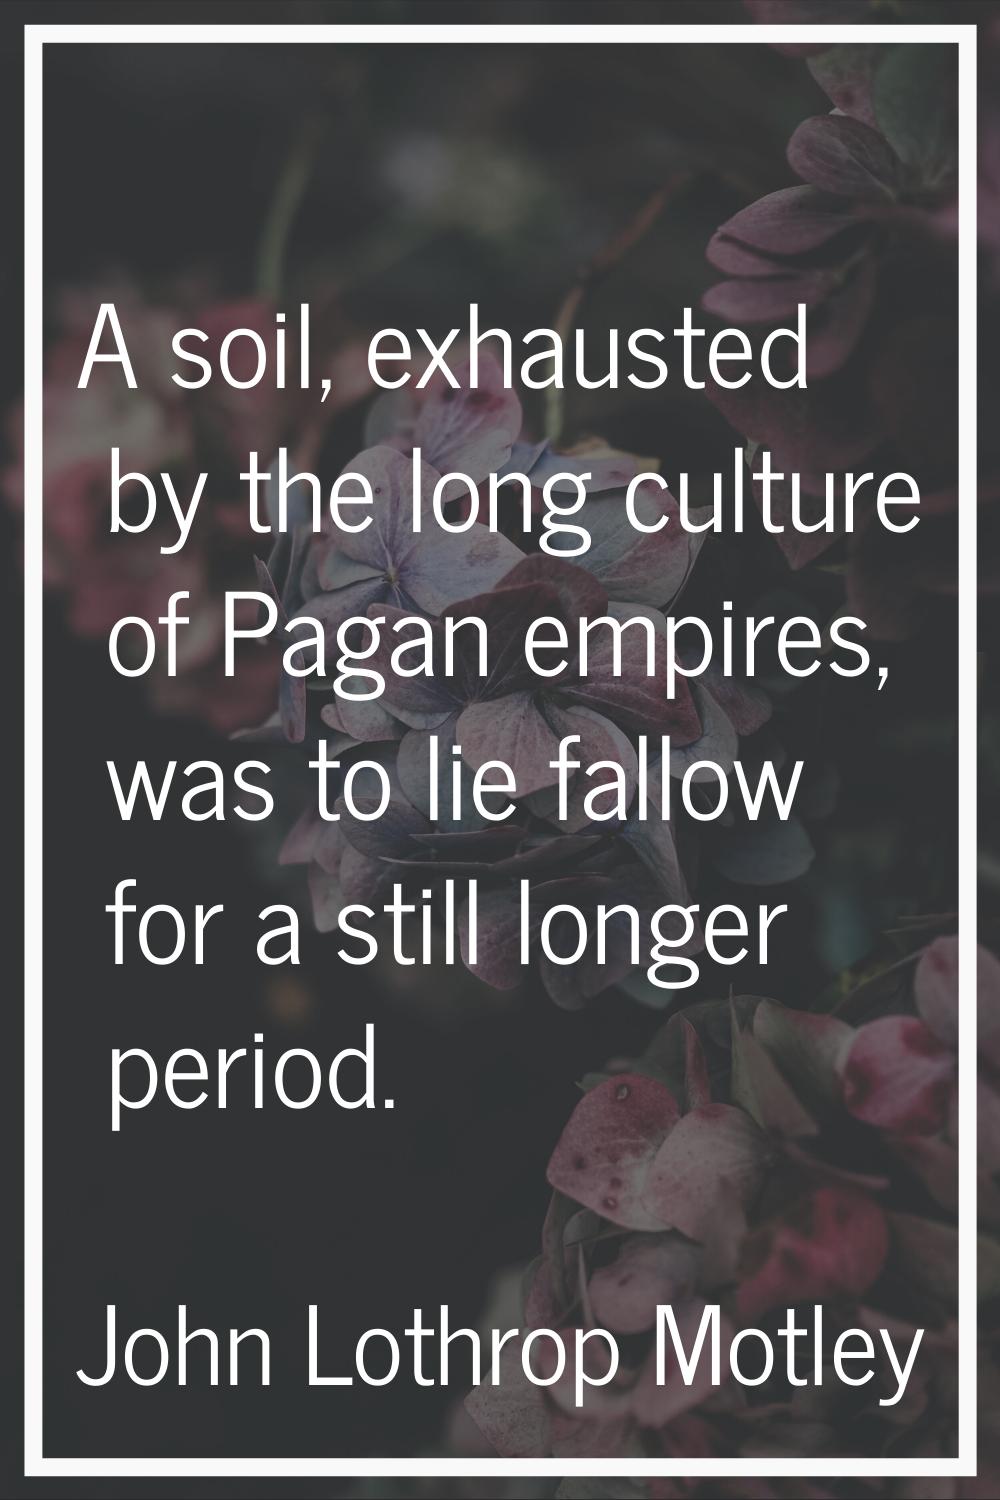 A soil, exhausted by the long culture of Pagan empires, was to lie fallow for a still longer period